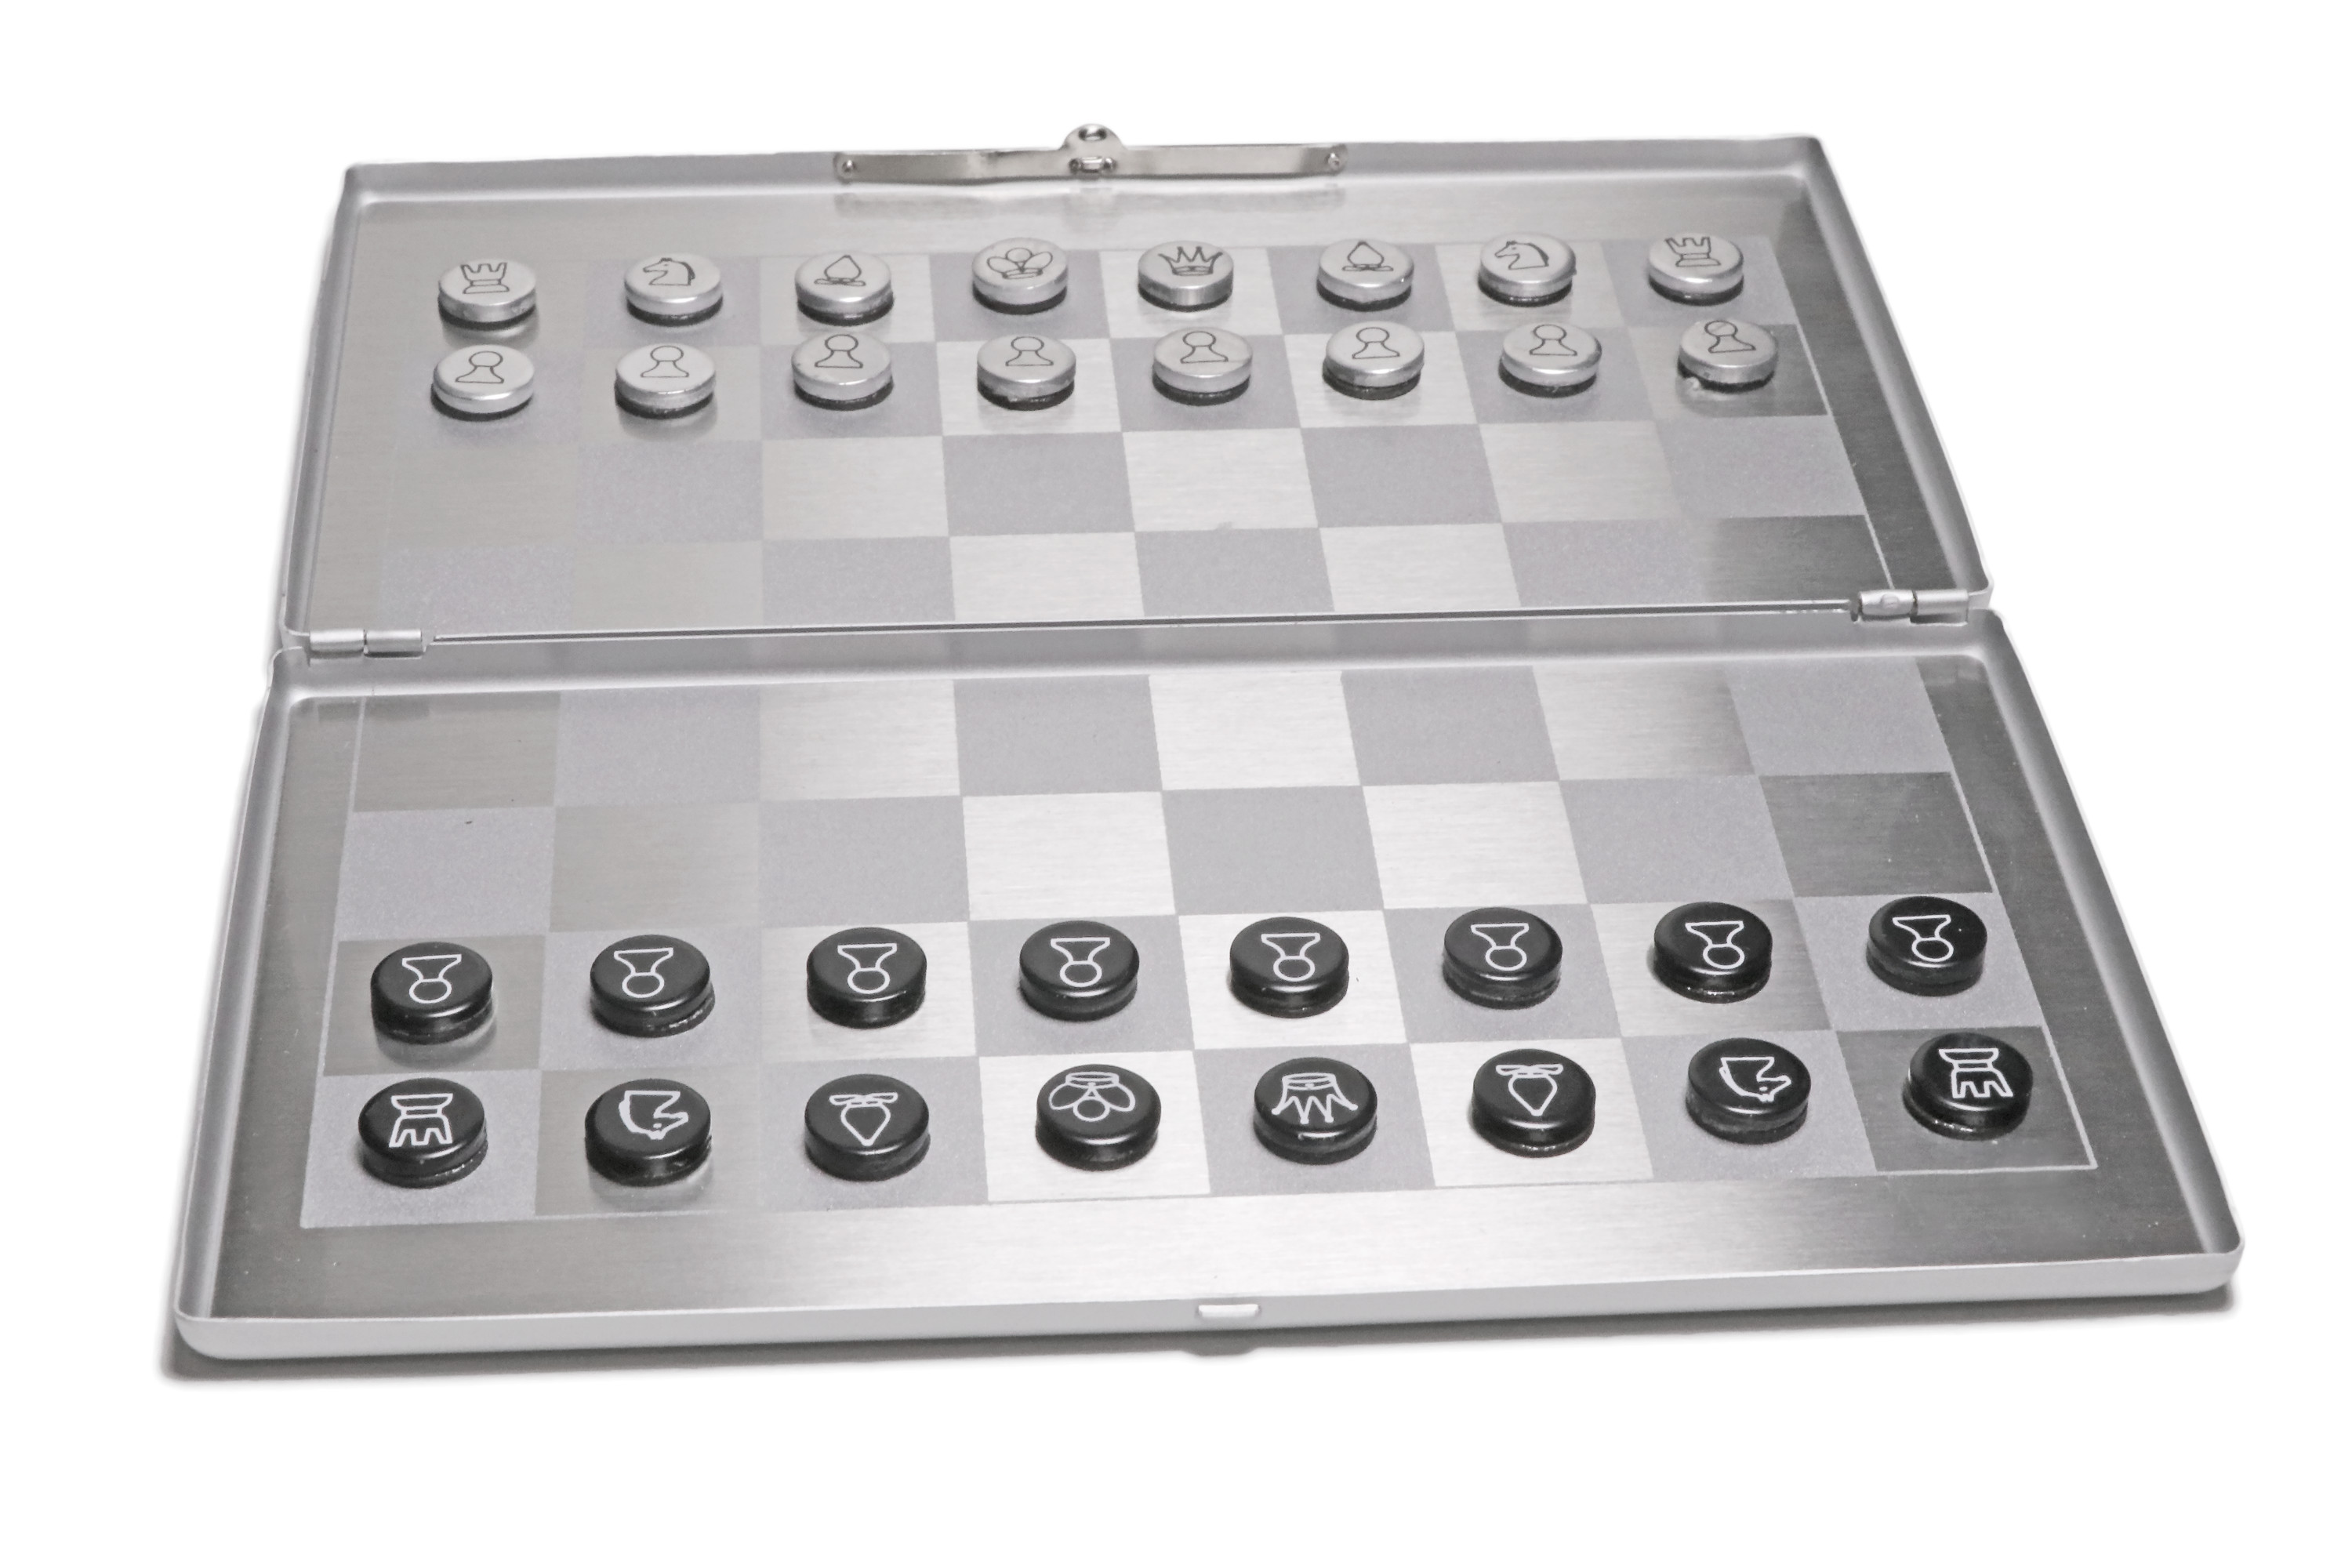 Personalized Aluminum Silver Travel Pocket Chessboard Game